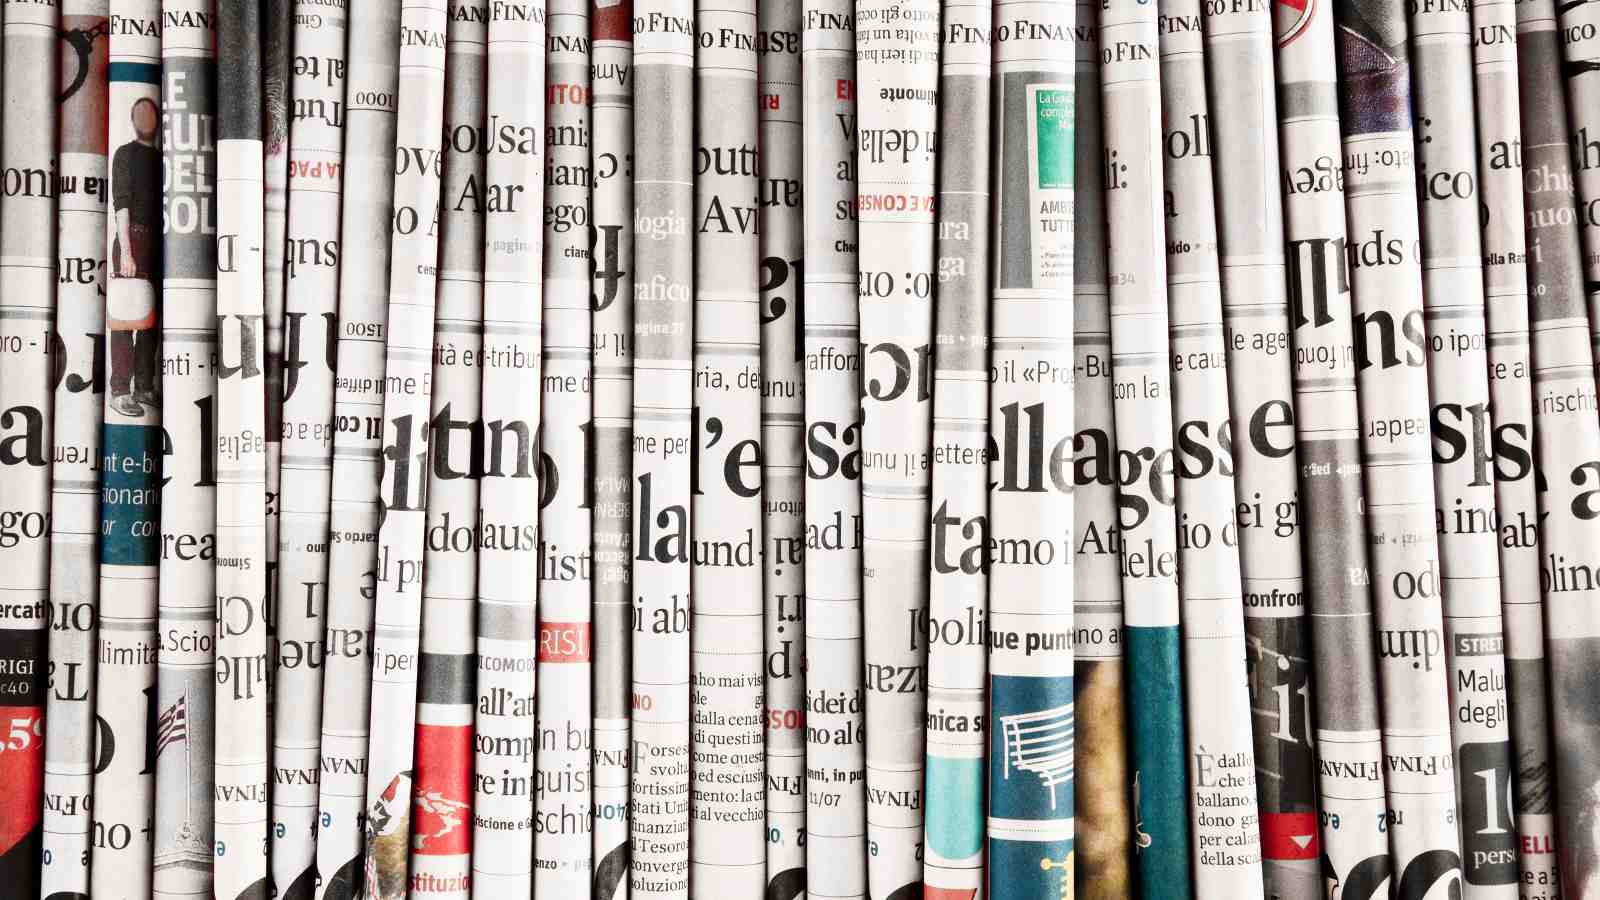 A stack of newspapers viewed horizontally from the side.